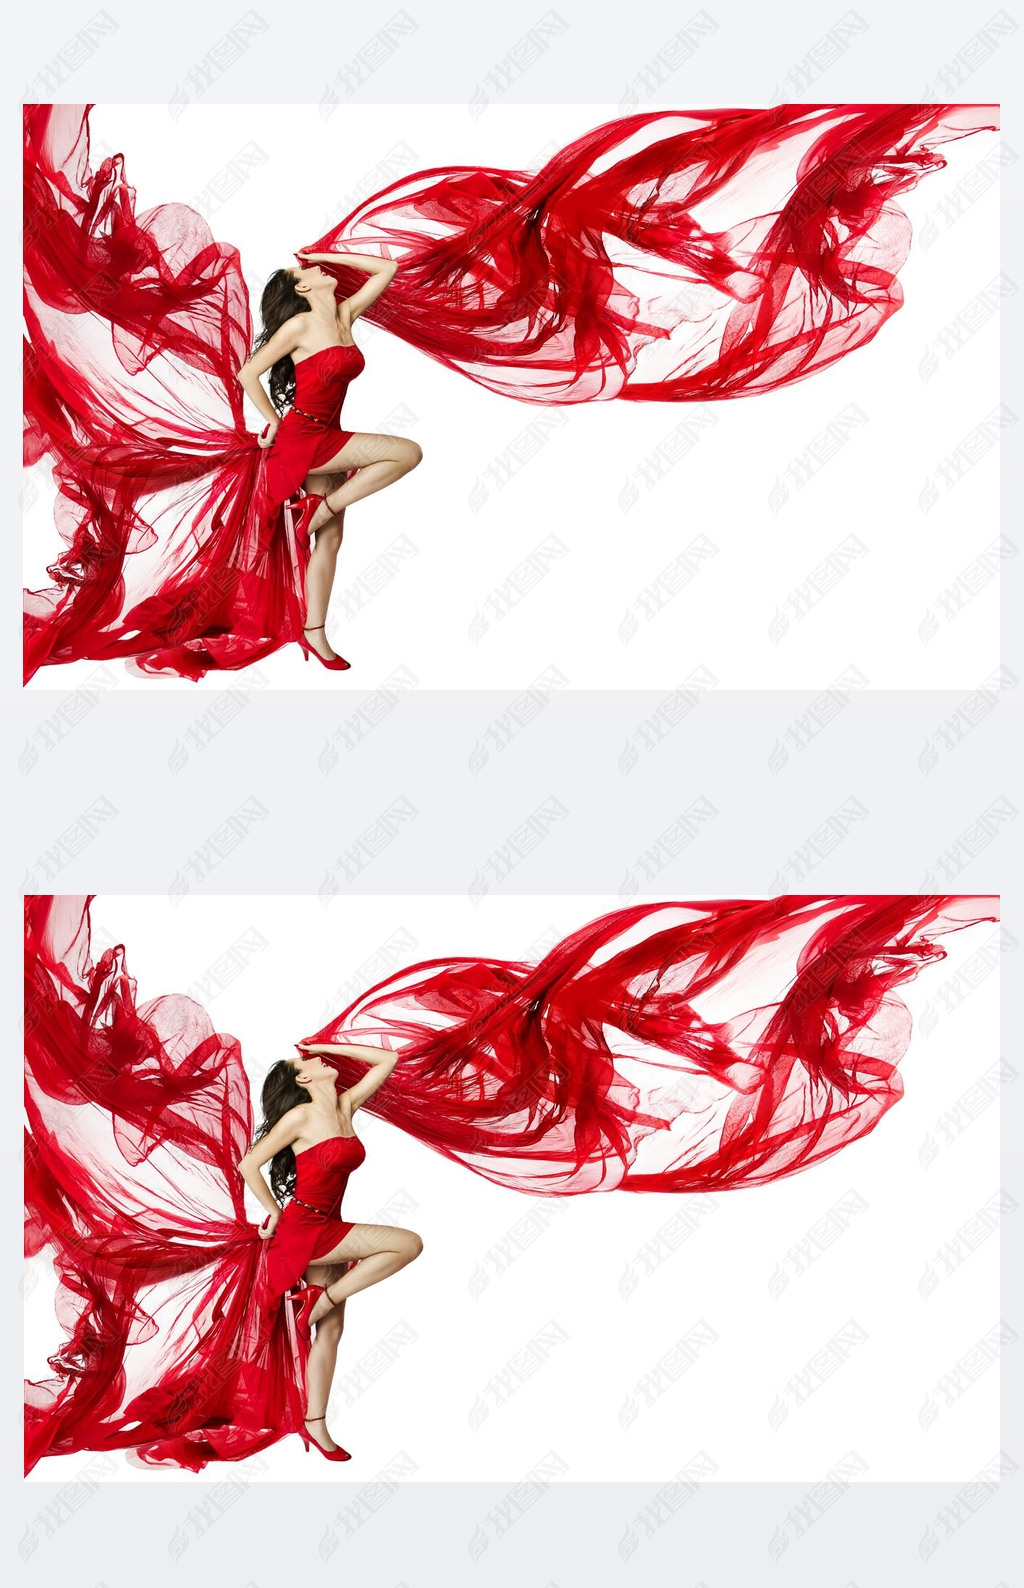 Woman Red Dress Flying on Wind Flow Dancing on White, Fashion Model